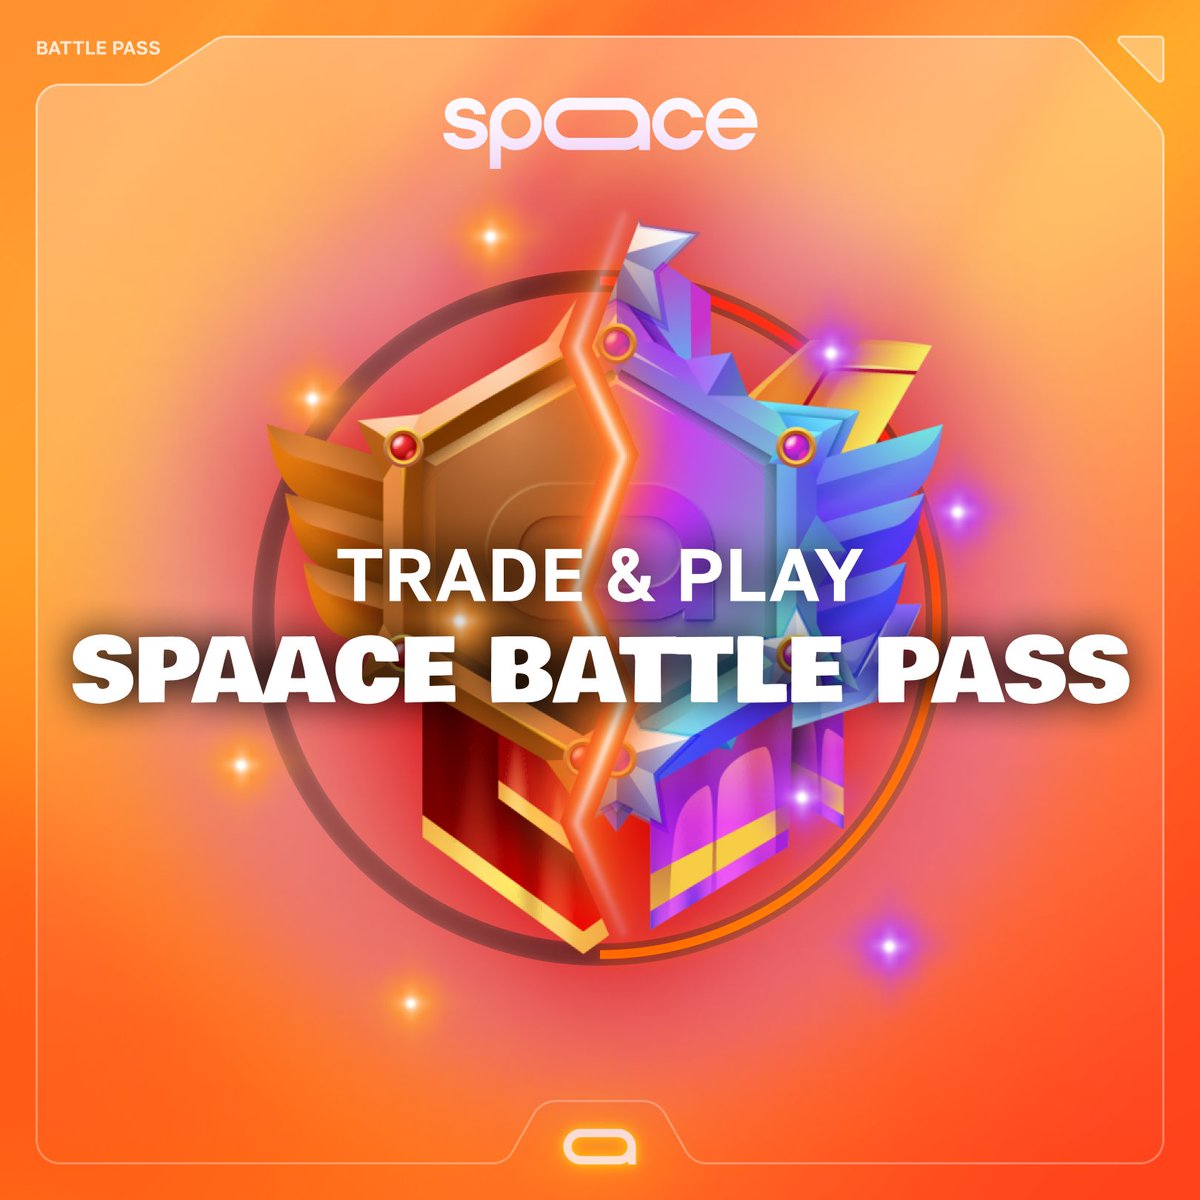 Introducing Spaace's Battle Pass ⚔️ A new era where trading meets gaming, turning NFT collectors into competitors. Aim for the top of the leaderboard, earn significant $SPAACE rewards, and join us in our vision to reward early supporters. Let's Make NFTs Great Again!